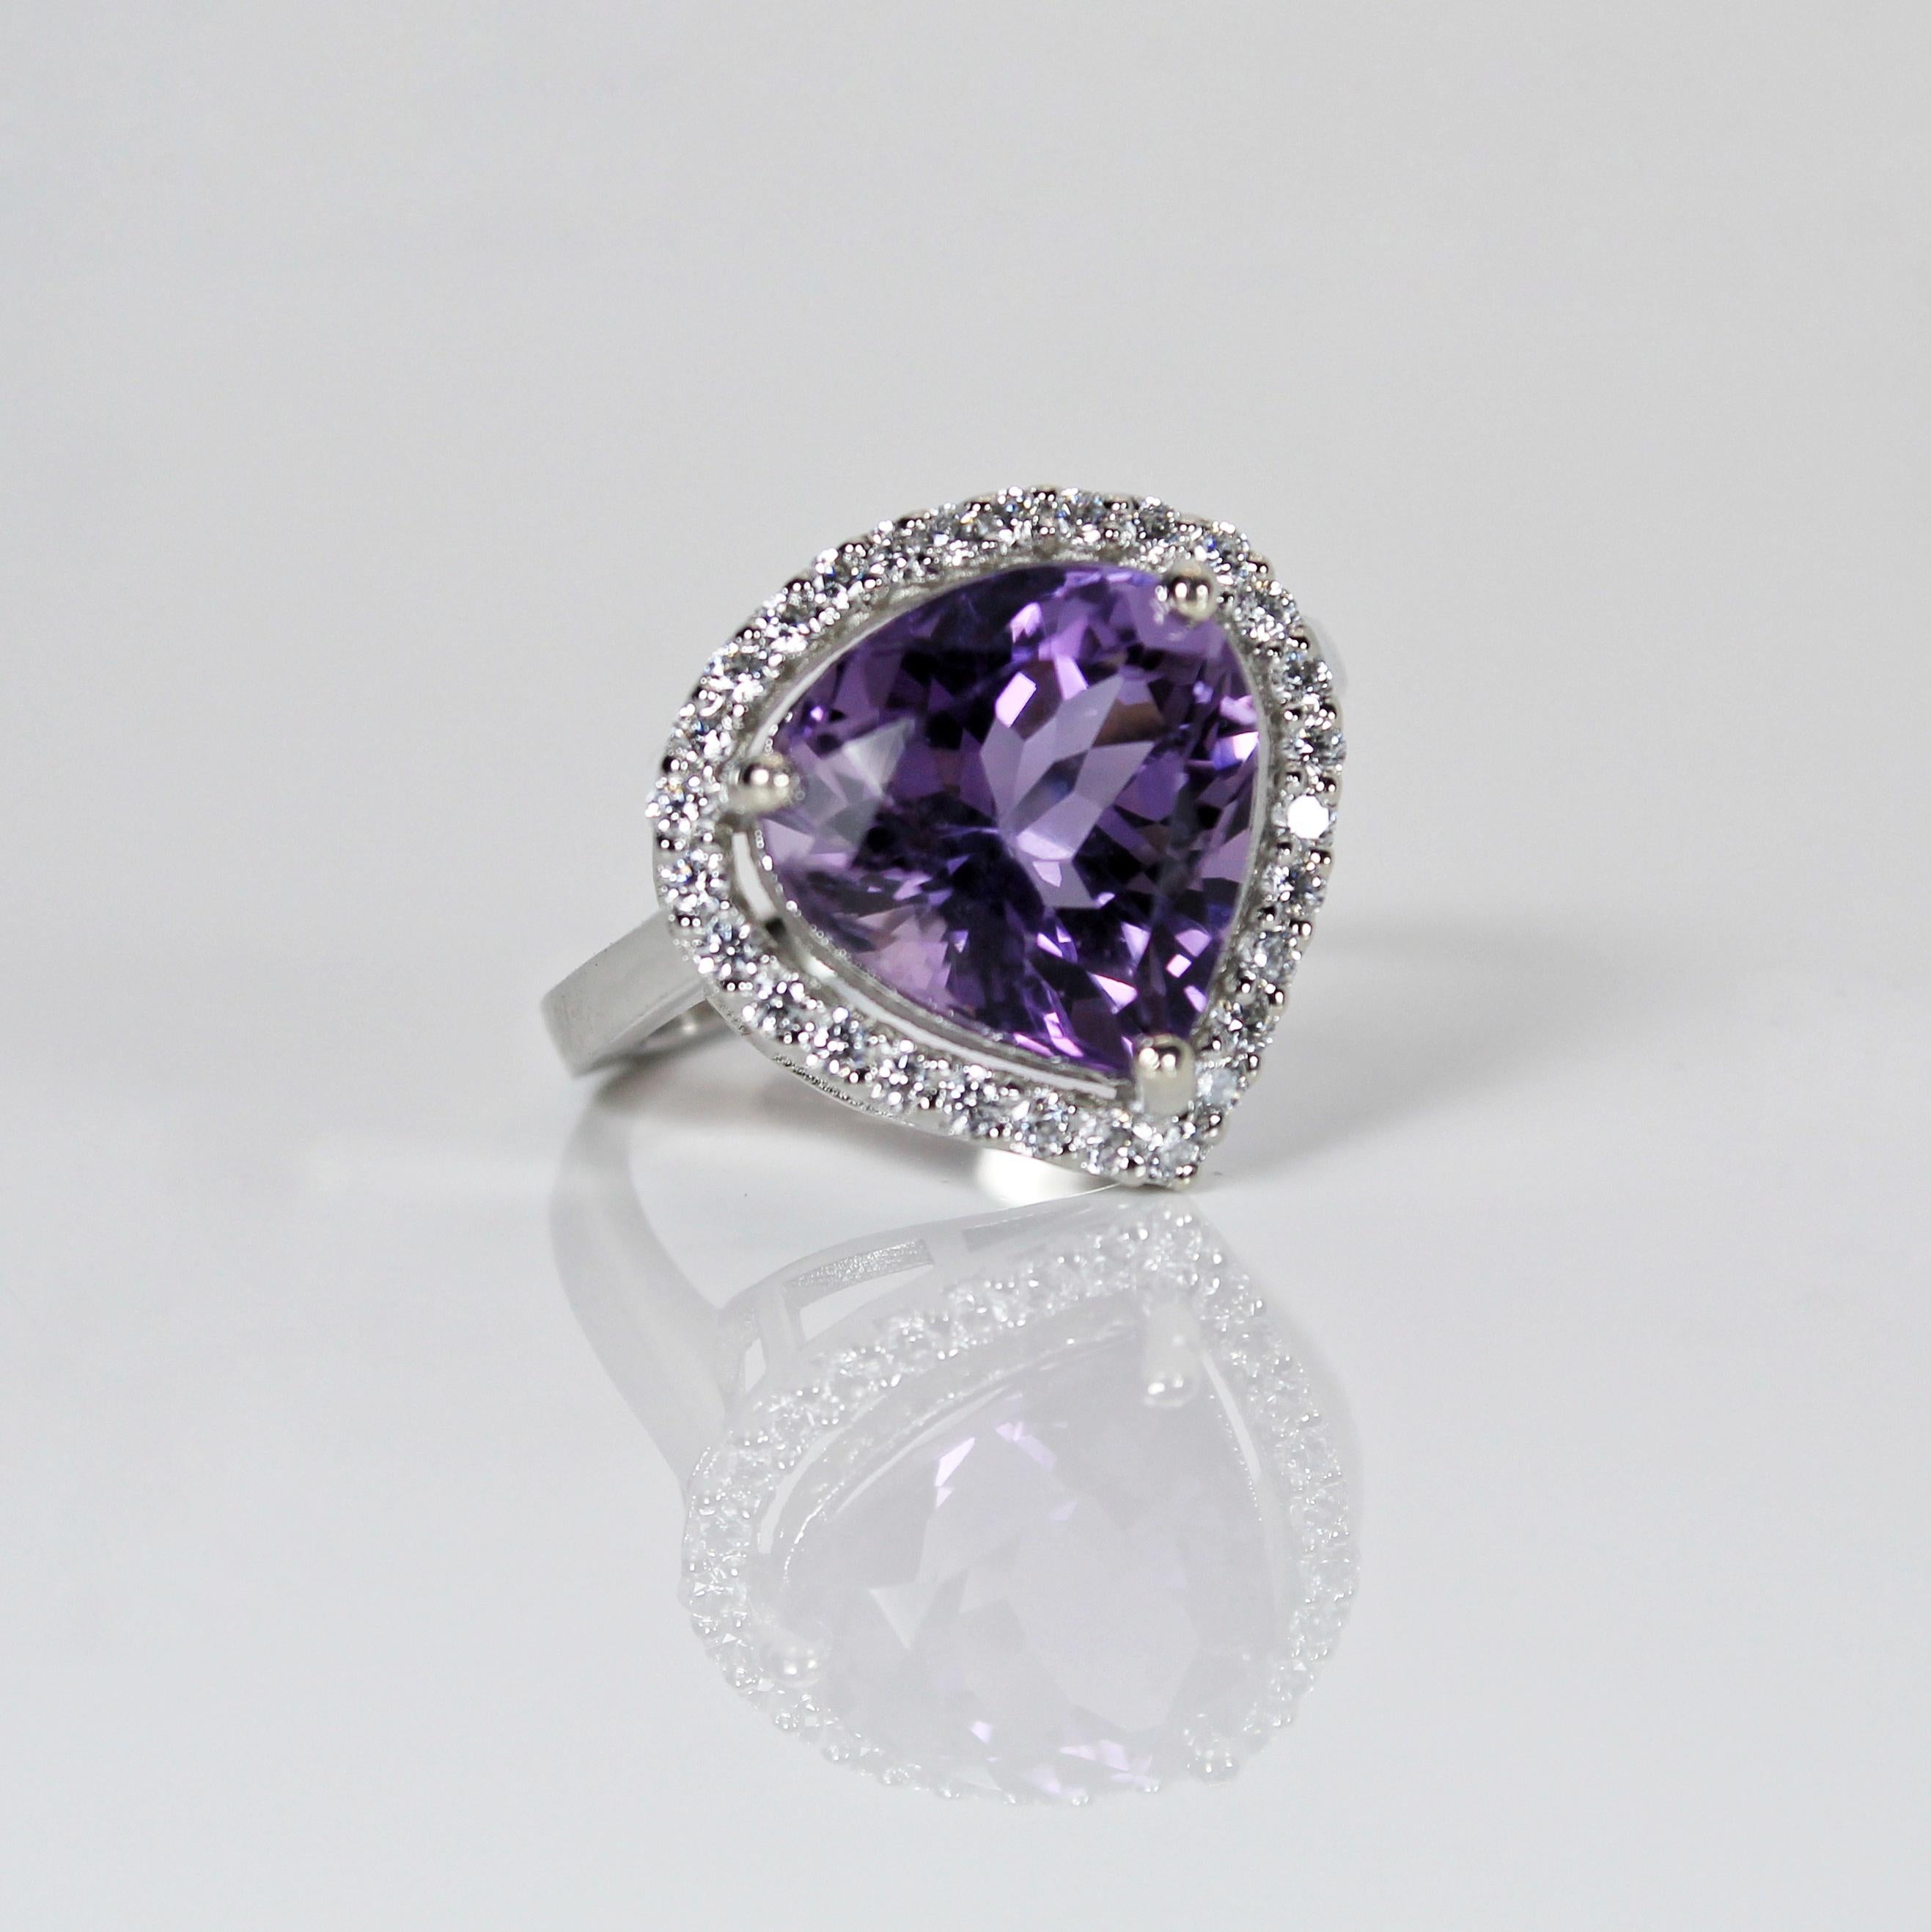 Product Details:

Metal - Silver
Indian ring size - 13
Product gross Weight - 4.530 Grams
Gemstone - Natural amethyst
Stone weight - 5.35 Carat
Stone shape - Pear
Stone size - 12 x 10 mm

our natural amethyst gemstone ring in sterling silver studded